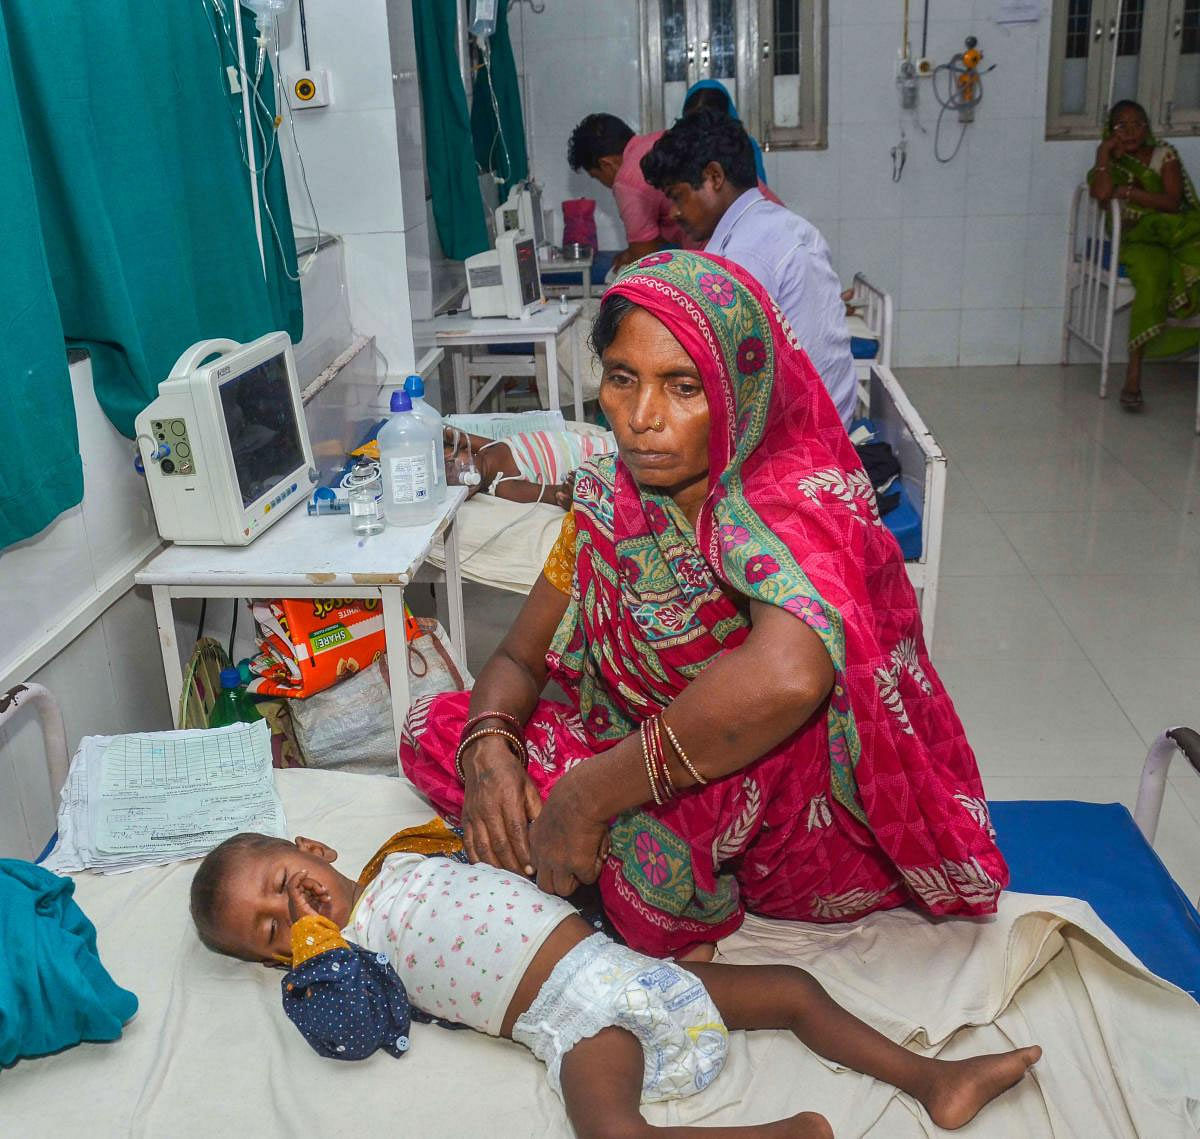 A child showing symptoms of Acute Encephalitis Syndrome (AES) being treated at a hospital in Muzaffarpur, Saturday, June 22, 2019. Three more children with symptoms of Acute Encephalitis Syndrome (AES) died at a hospital in Bihar's Muzaffarpur district Friday taking the toll to 139. (PTI Photo) 